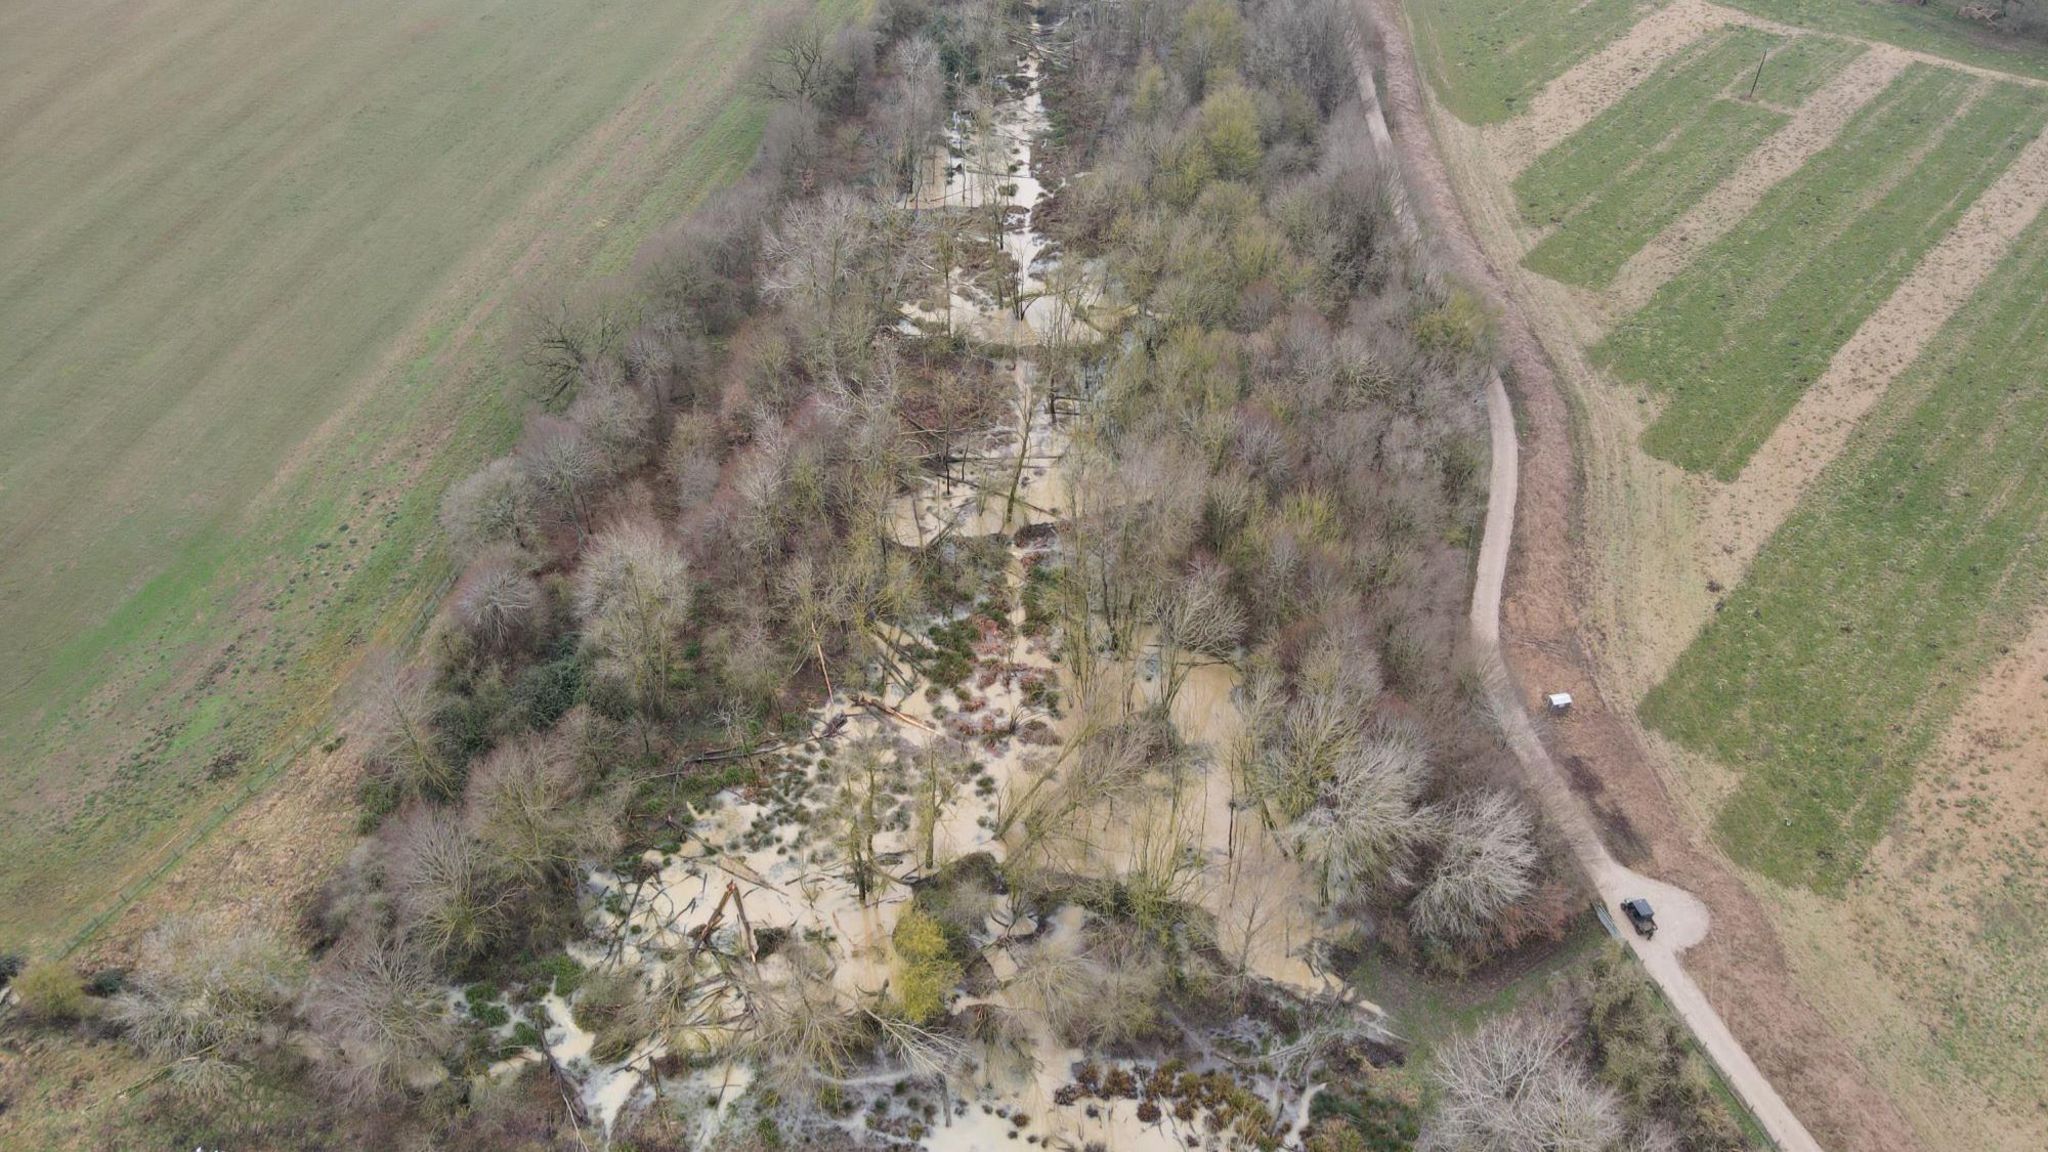 Aerial view of the beaver habitat at a working farm near Braintree in Essex